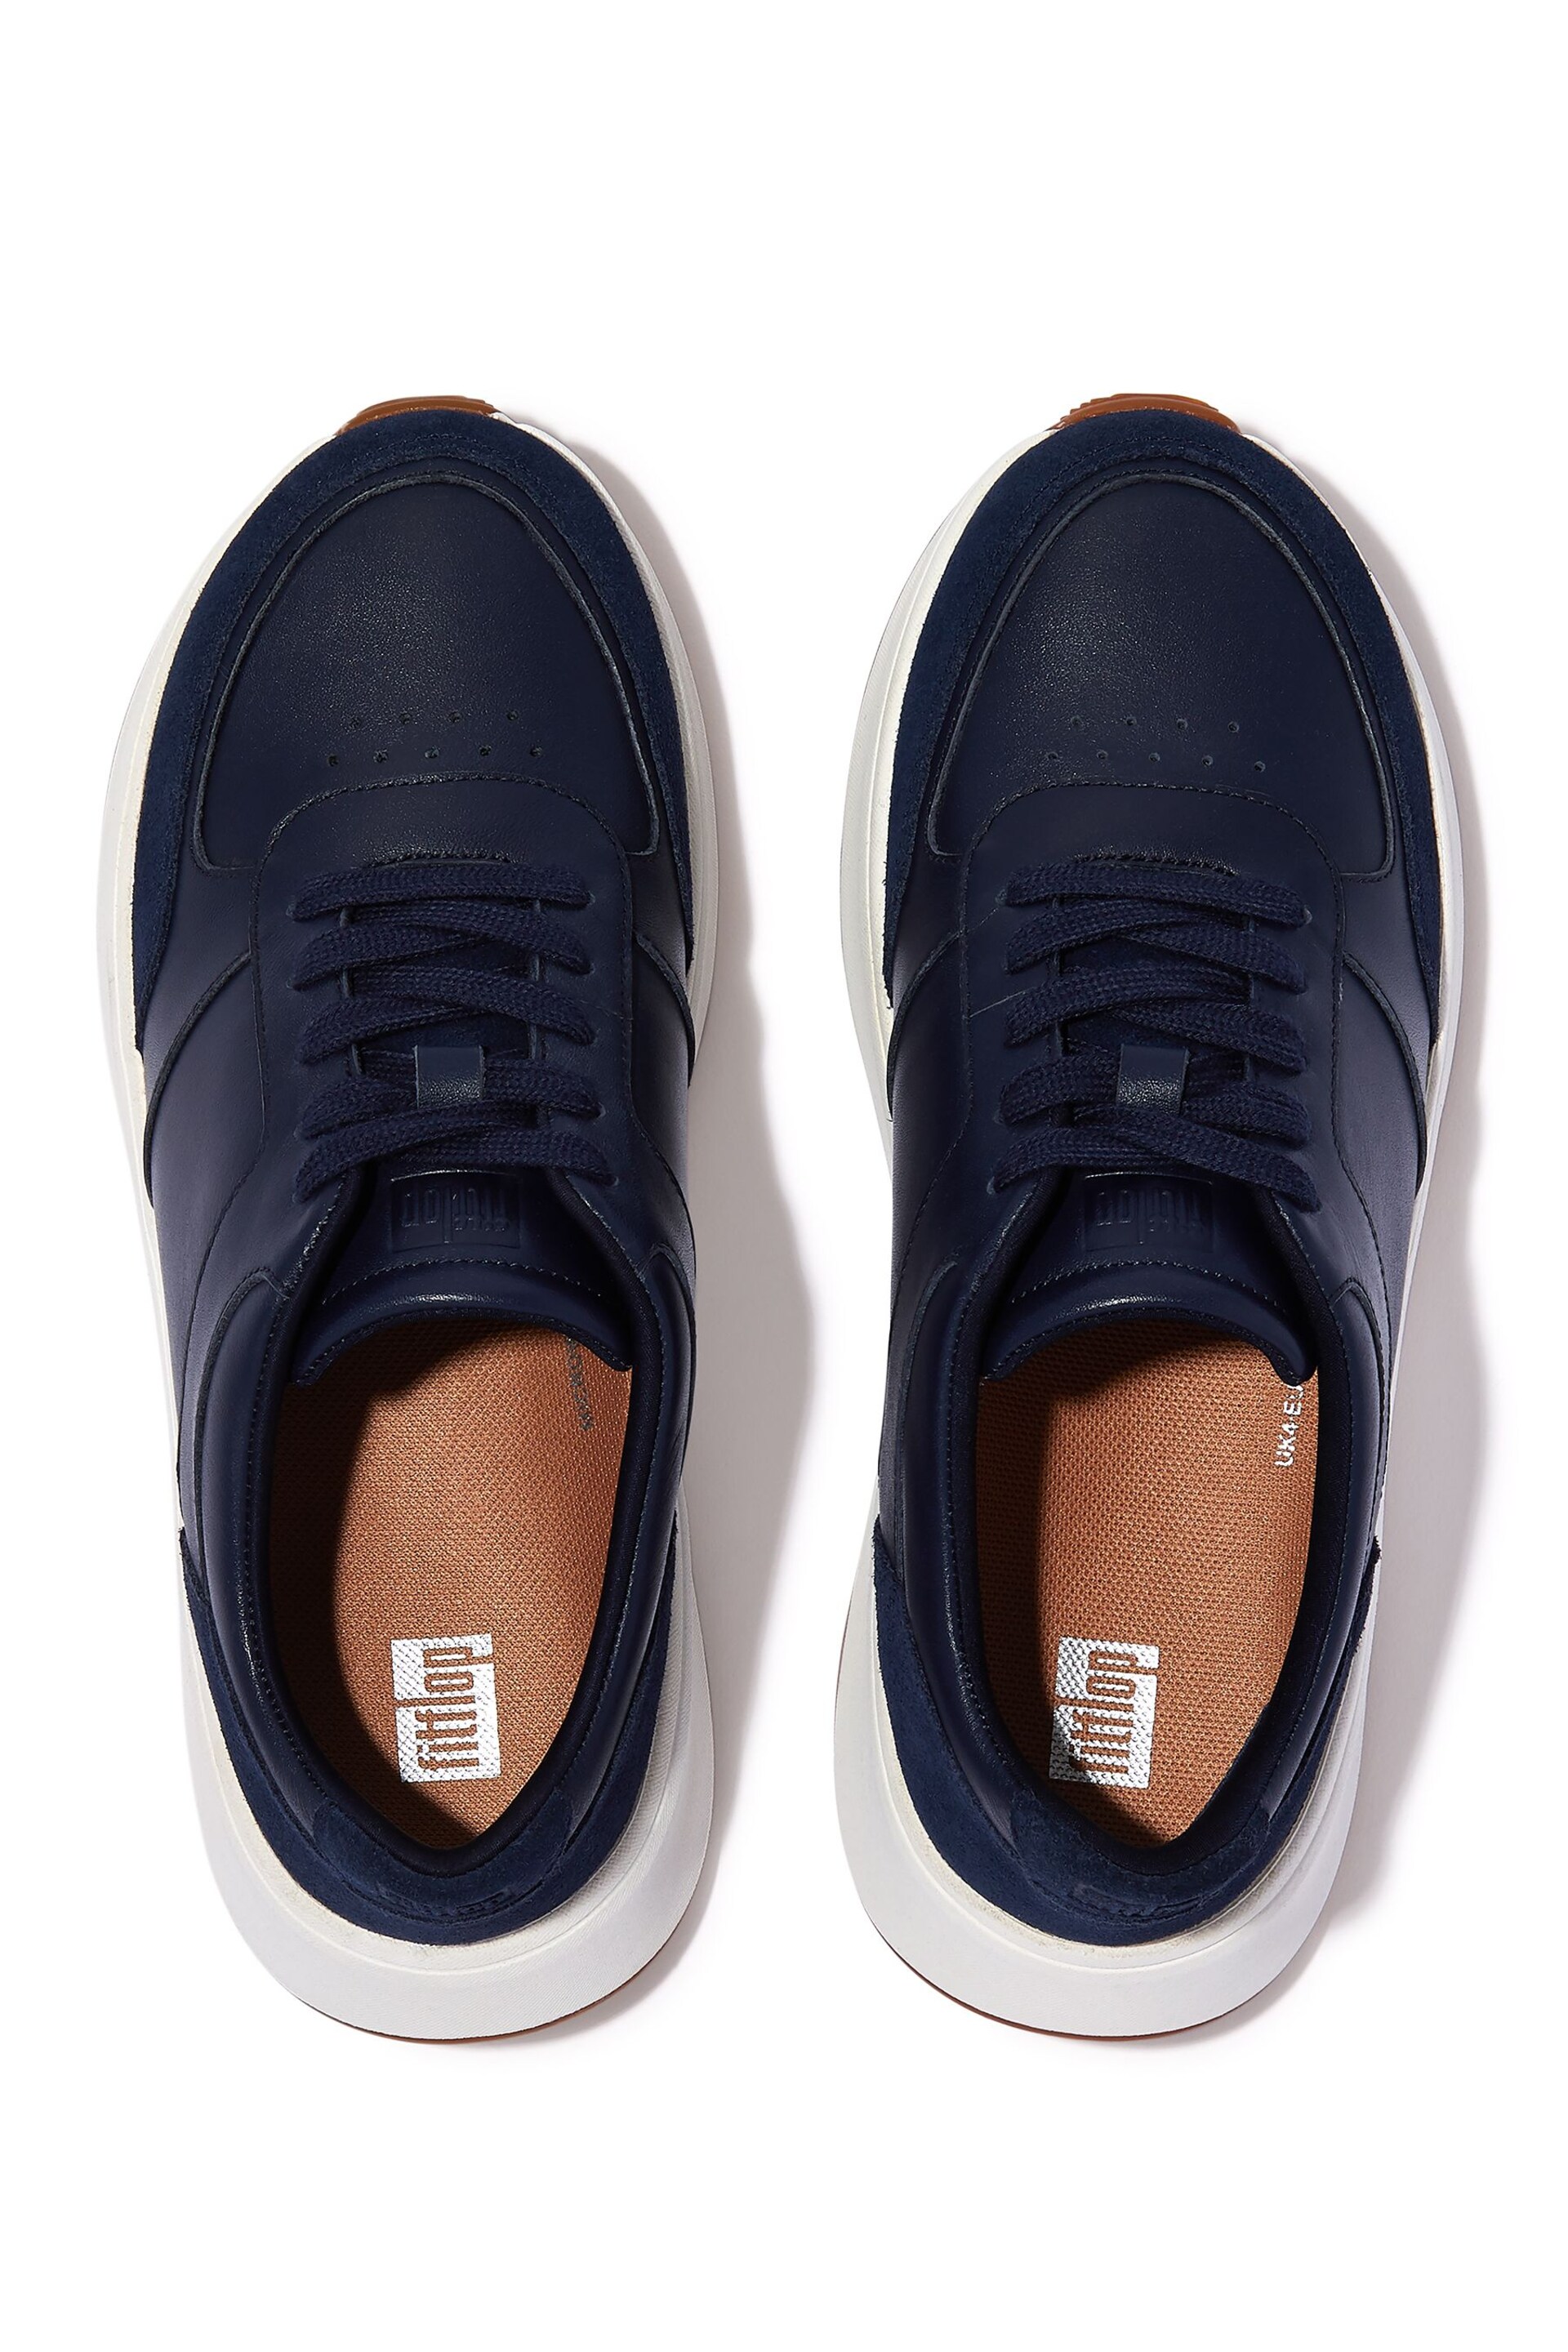 FitFlop Blue F Mode Leather Suede Flatform Sneakers - Image 3 of 4